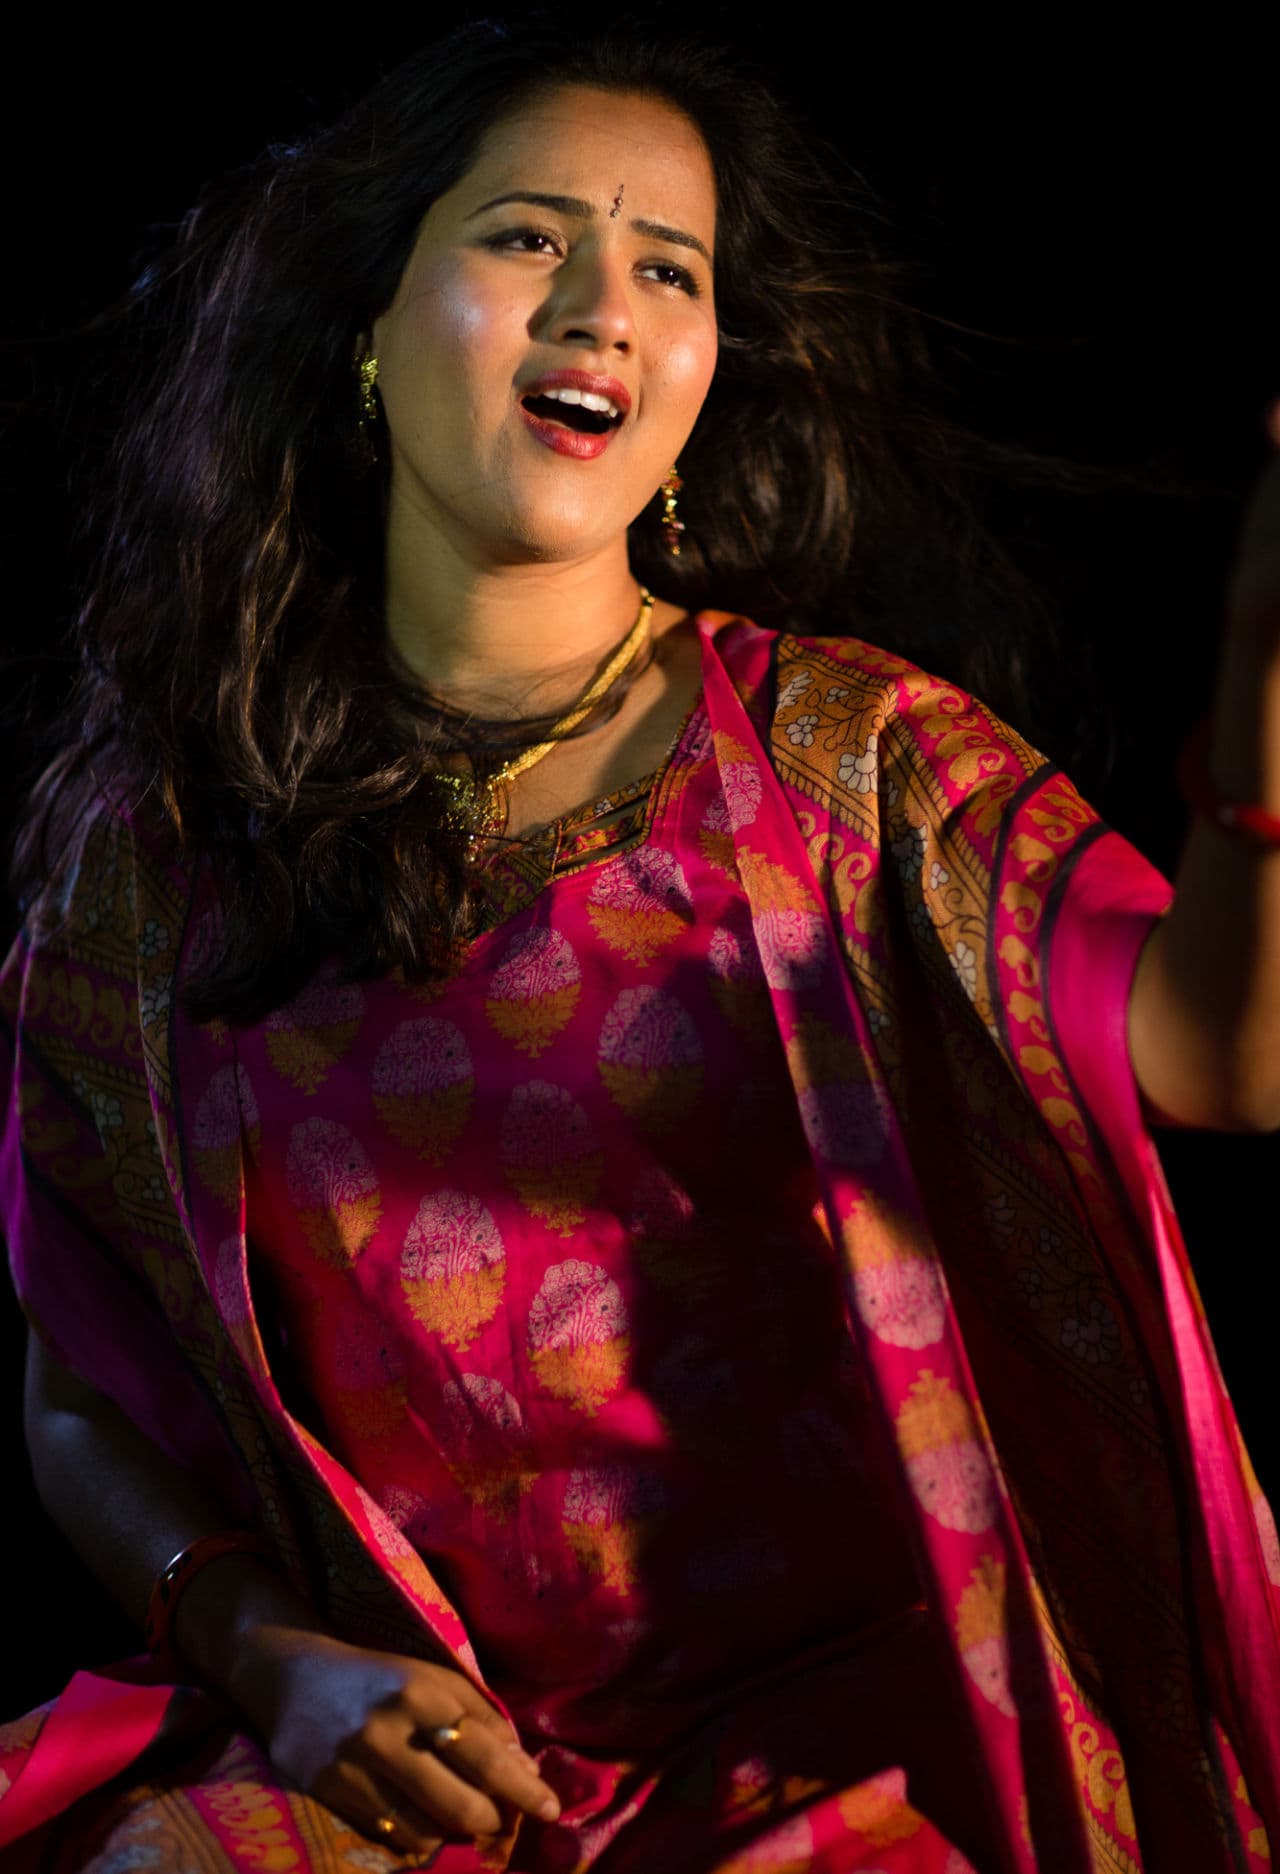 Anuja Panditrao, a 2013 IndianRaga fellow from Canada, performs during the video shoot at the IndianRaga Fellowship in New York. (Vladimir Weinstein Photography)